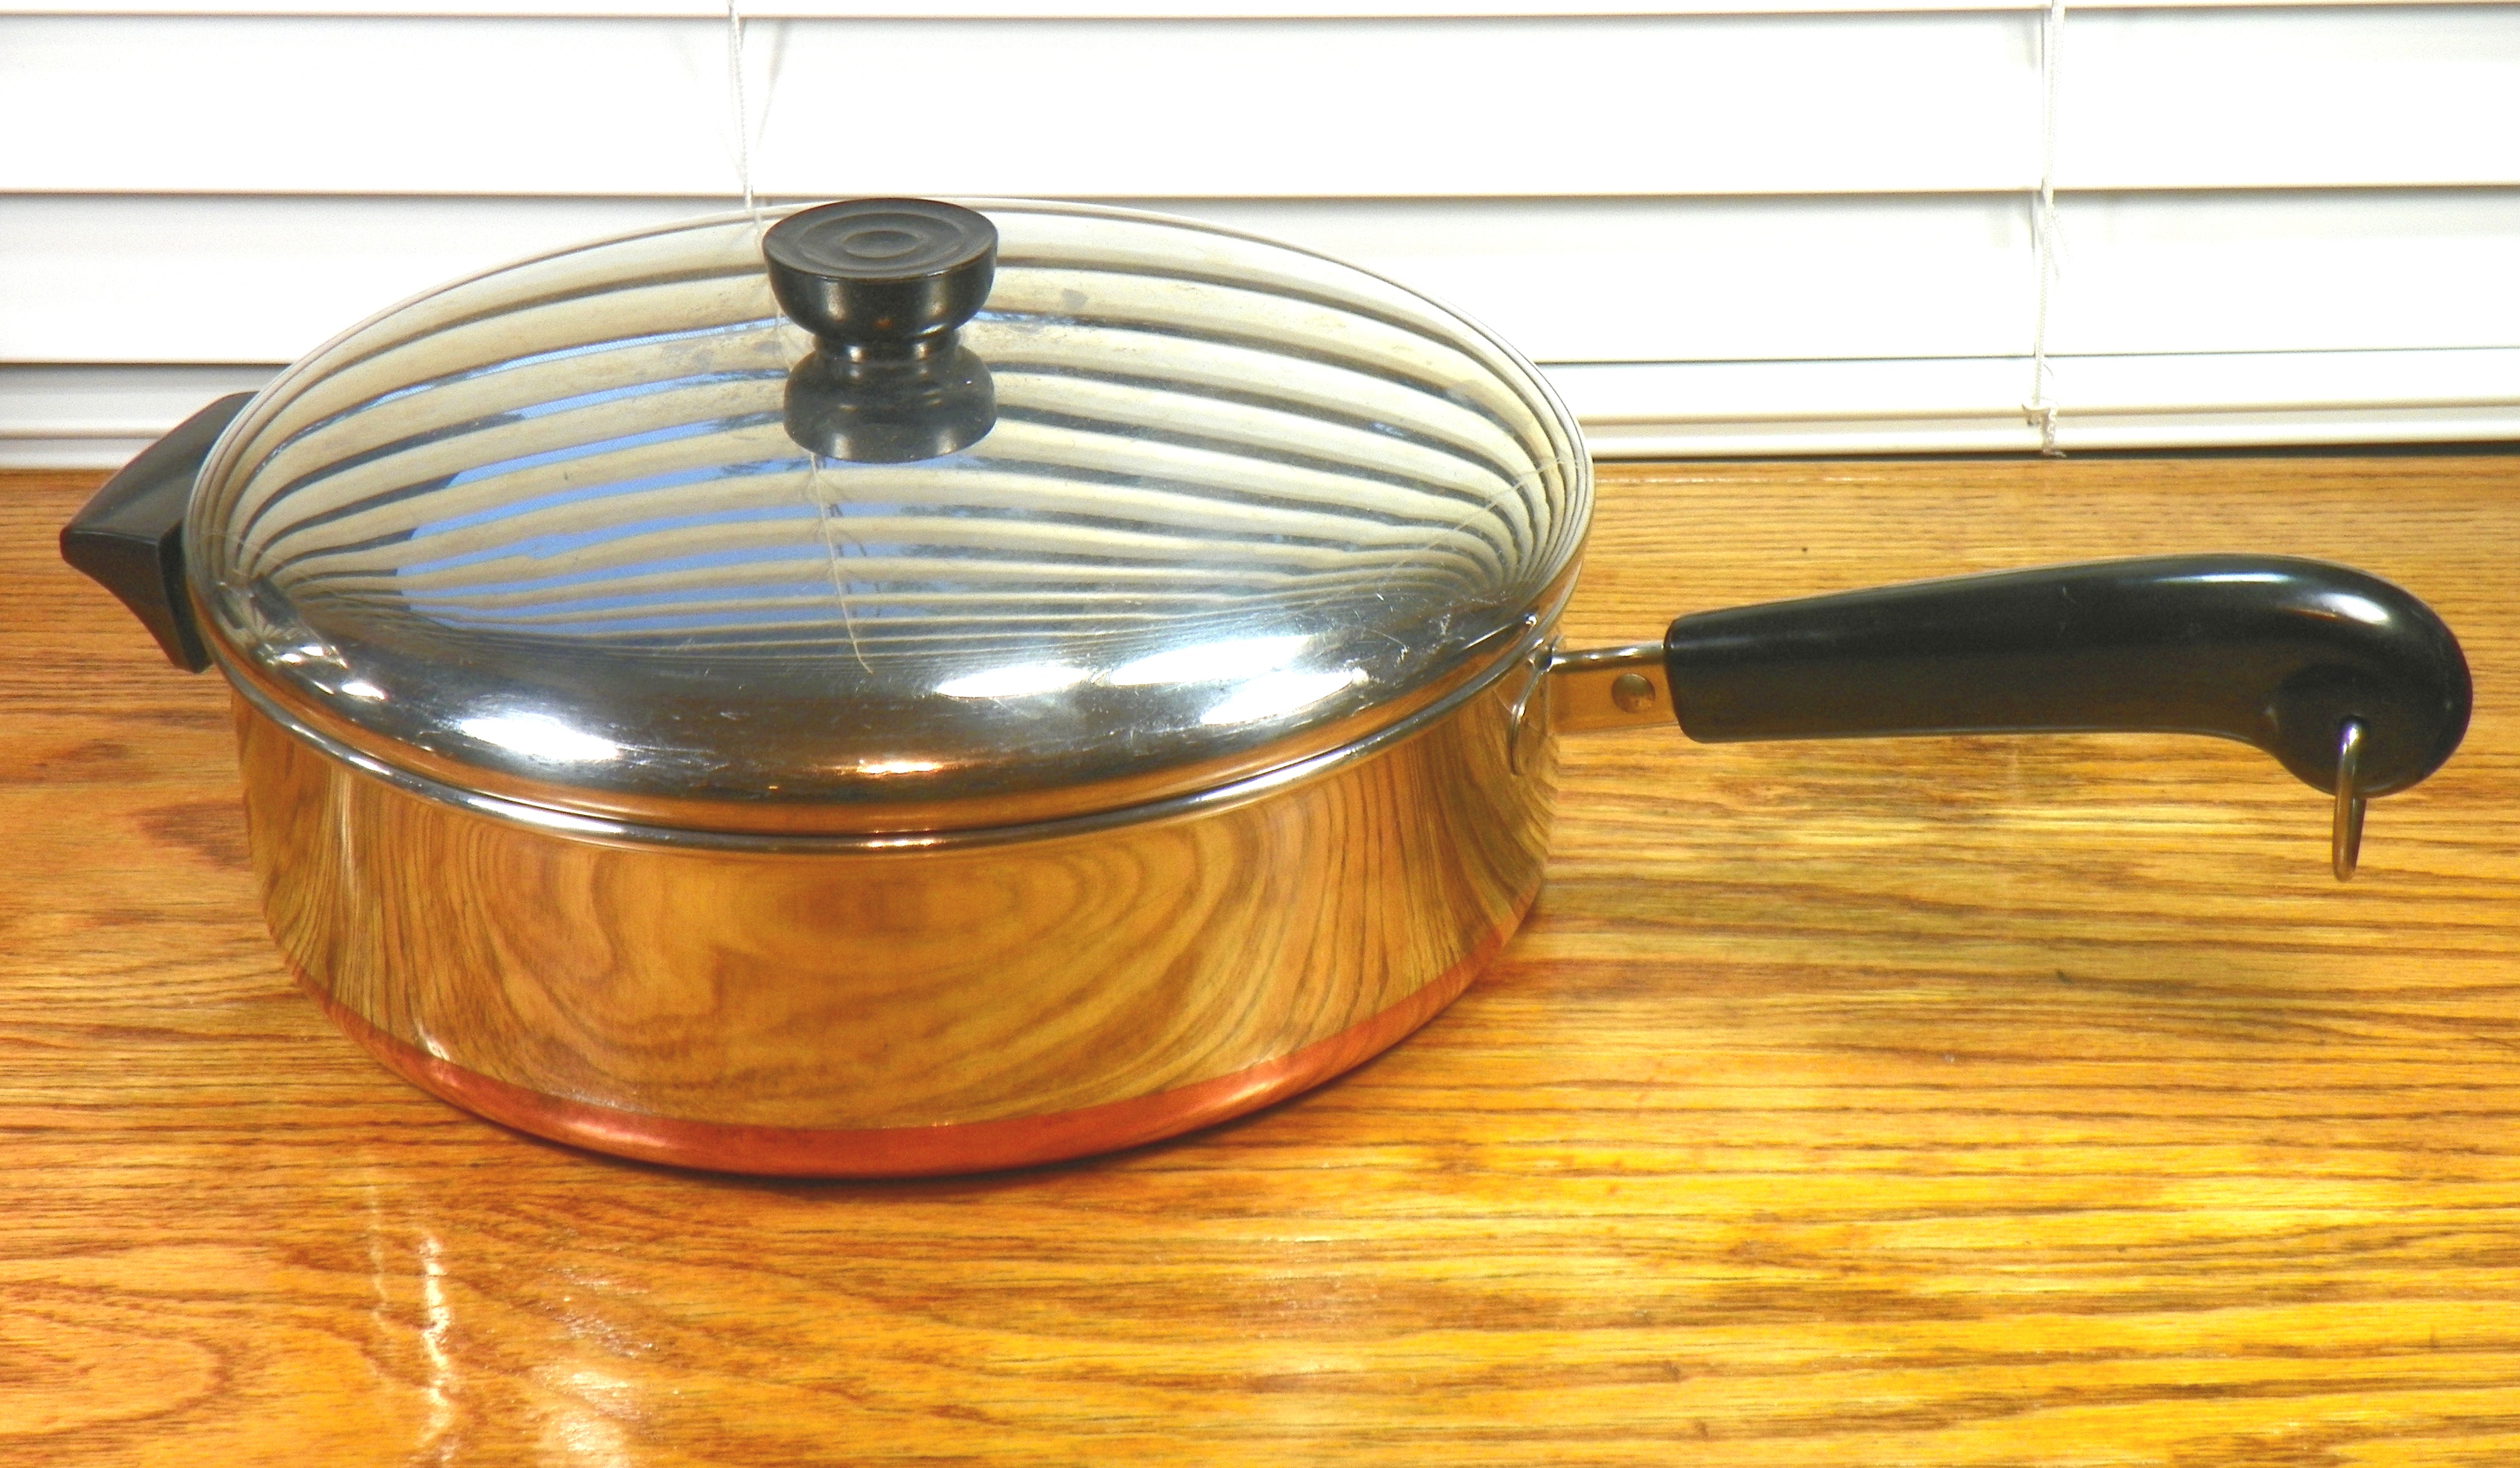 Revere Ware Copper Bottom Frying Pan Large 12 inches